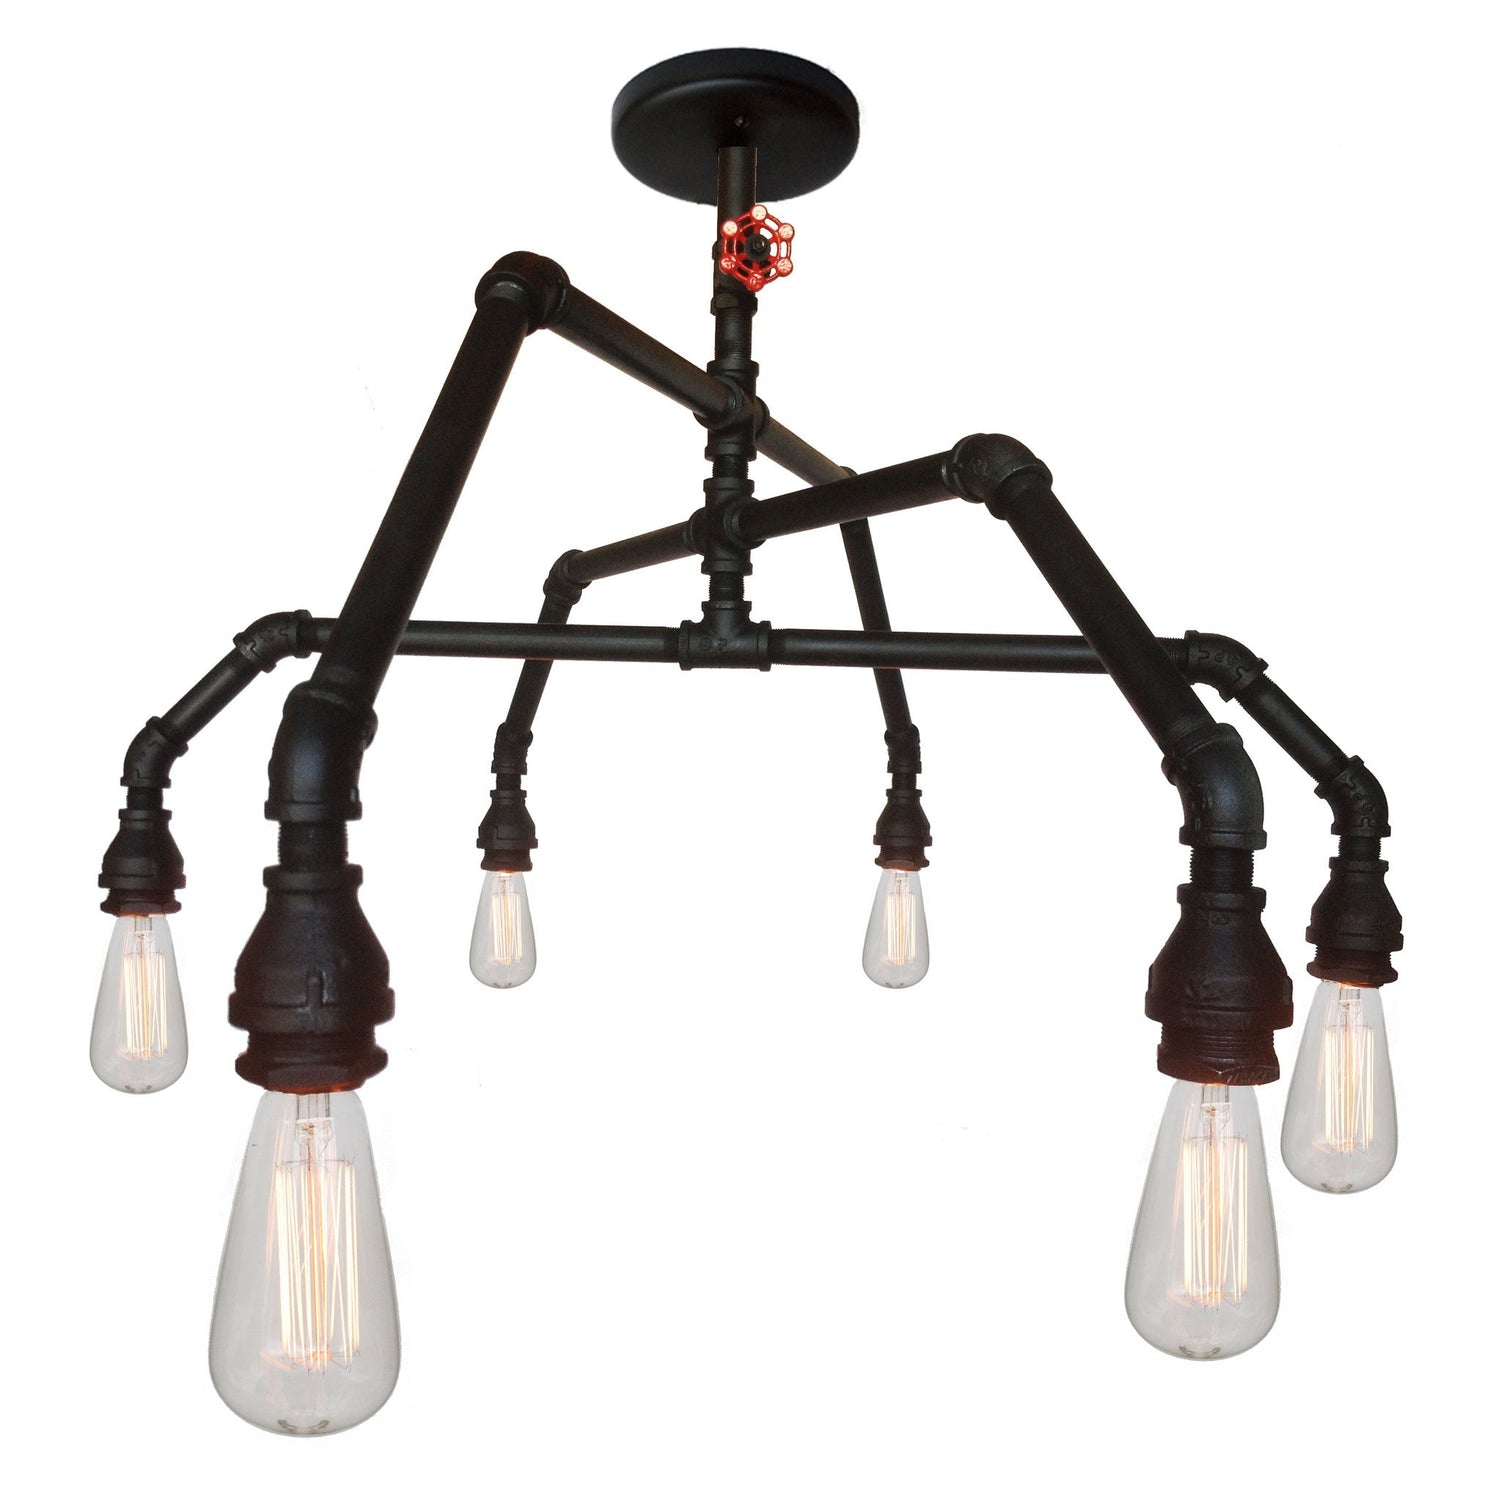 Industrial Rustic Pipe and Vintage Valve Chandelier - 6 Light Hammers and Heels